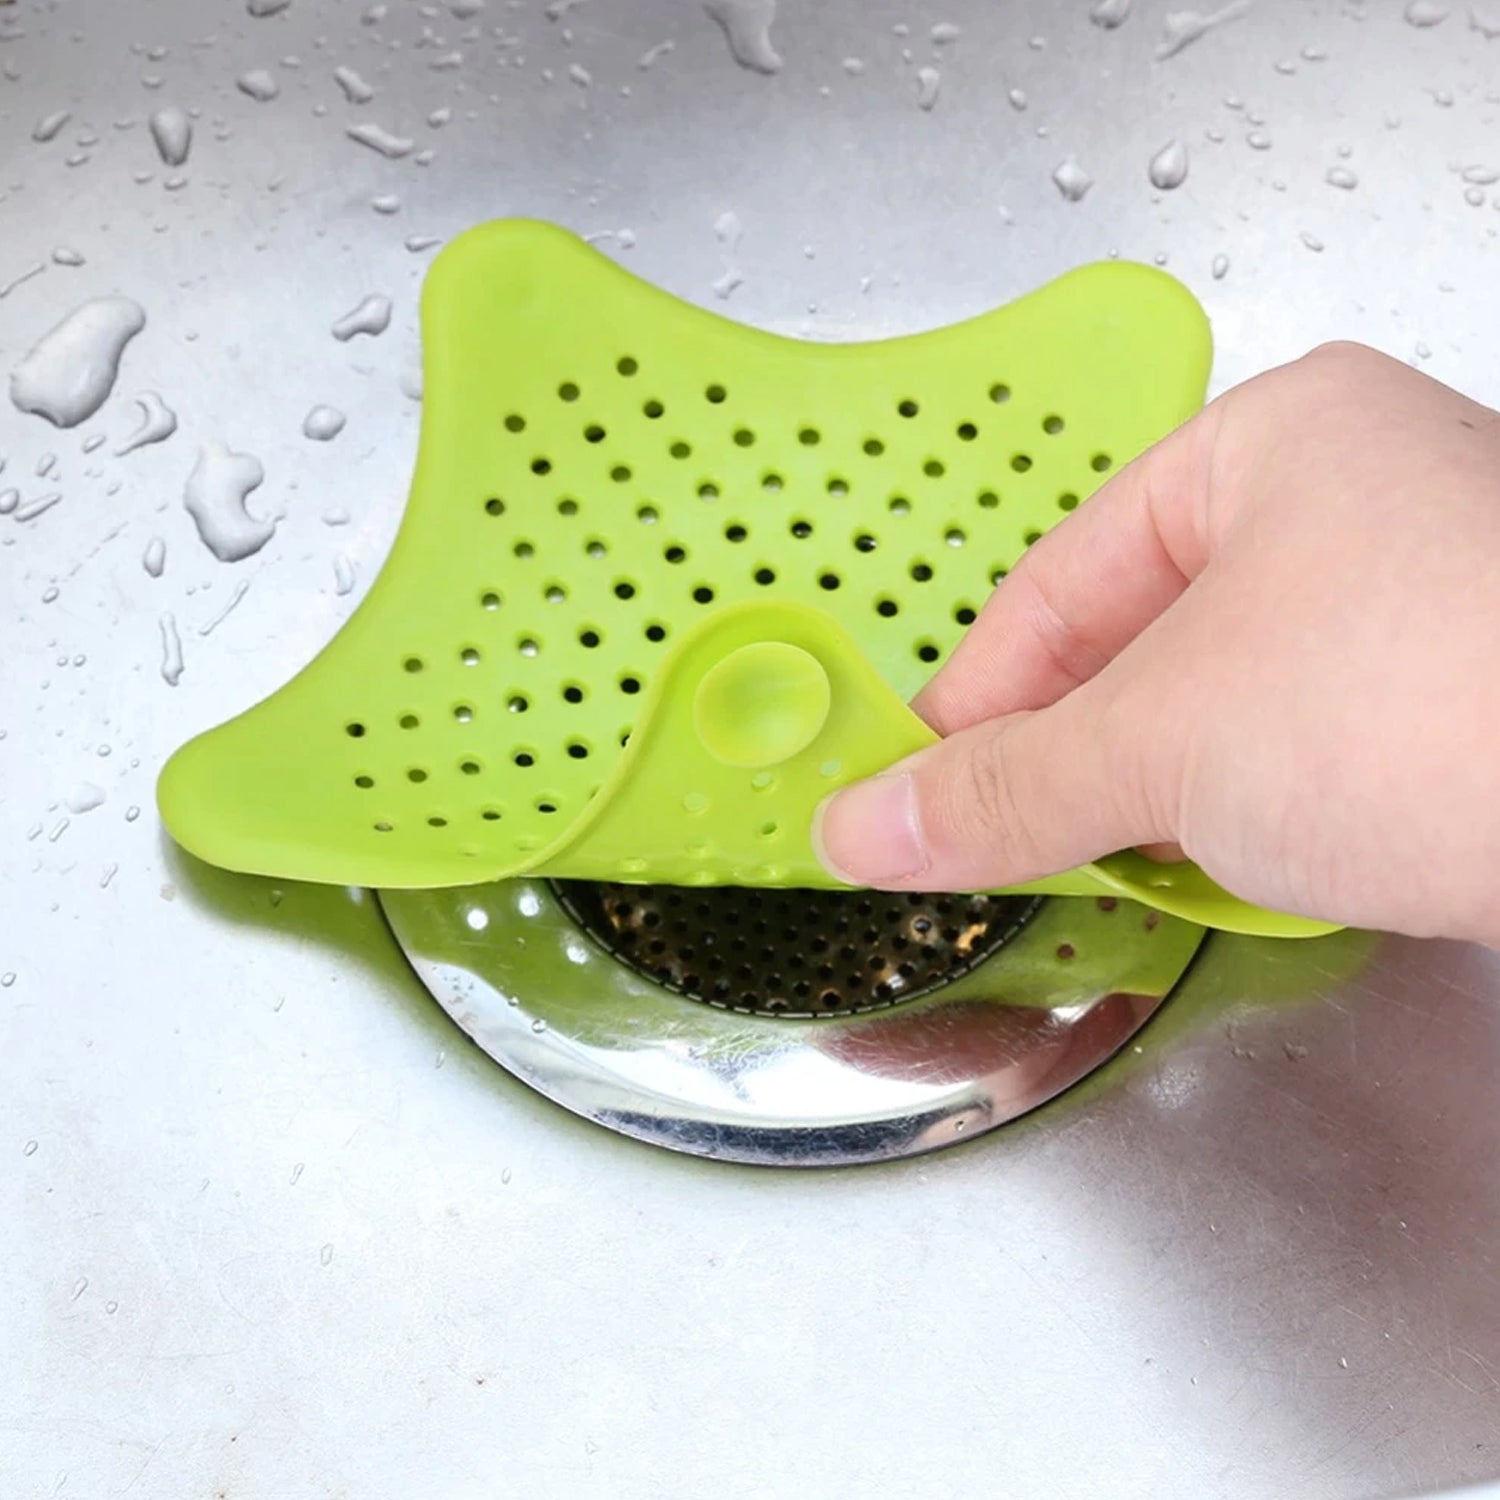 0829 A Star Sink Strainer used in all kinds of place like house kitchens for using it as a sink strainer purposes.